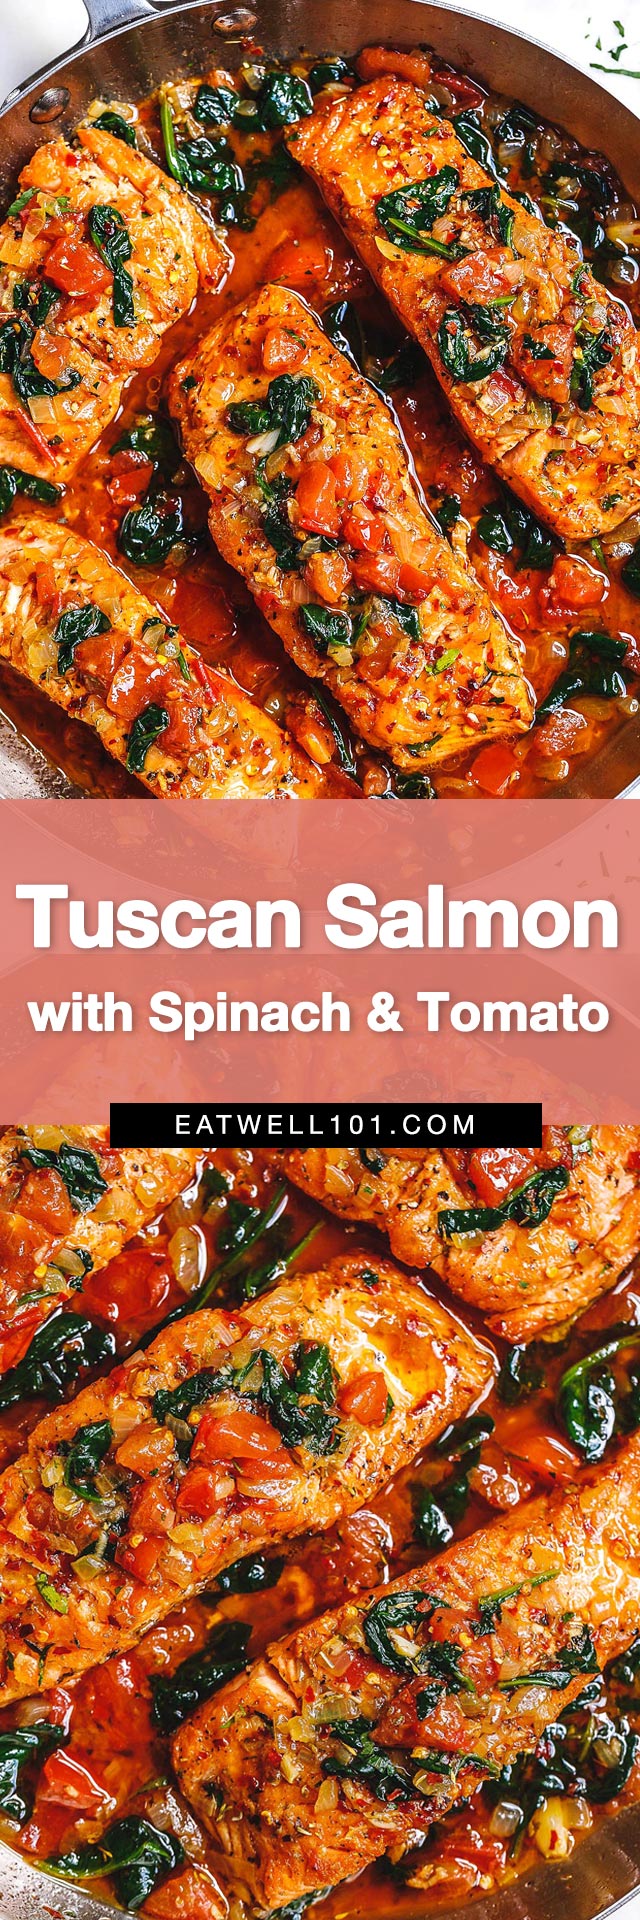 Tuscan Garlic Butter Salmon - #salmon #recipe #eatwell101 - This easy and healthy salmon recipe takes just a few minutes of prep and makes a perfect weeknight meal in 30 minutes or less. 